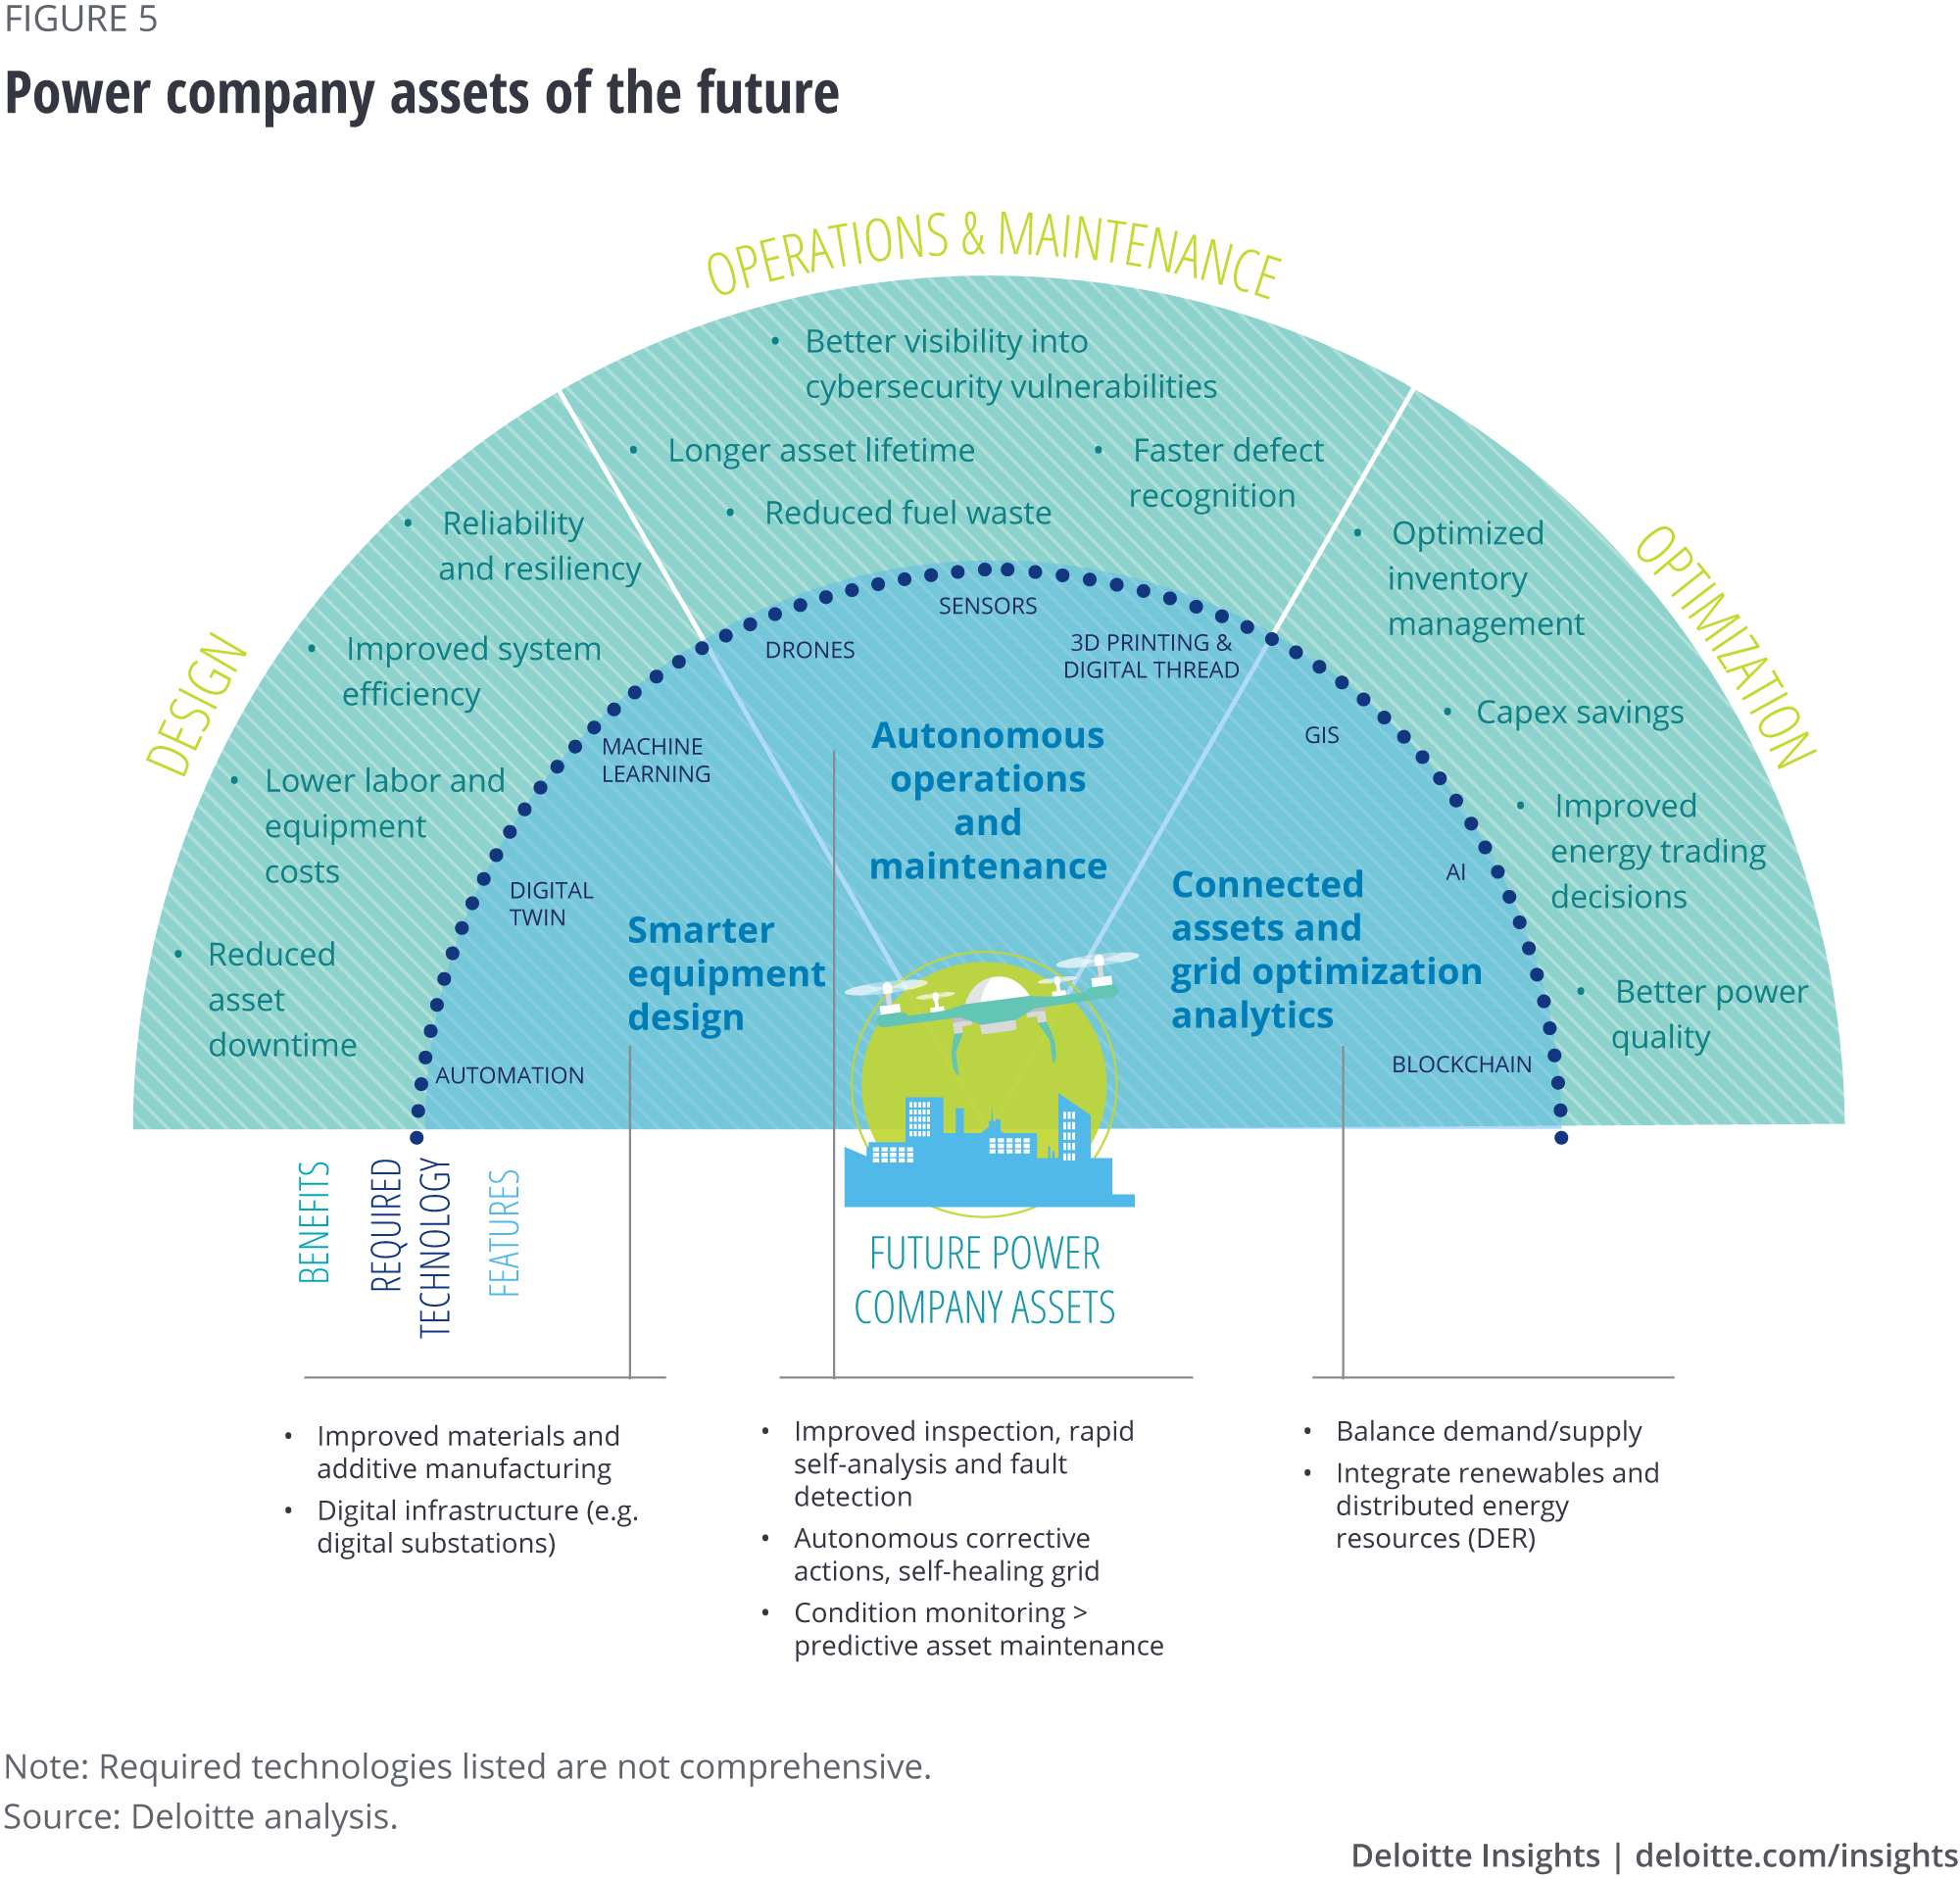 Power company assets of the future